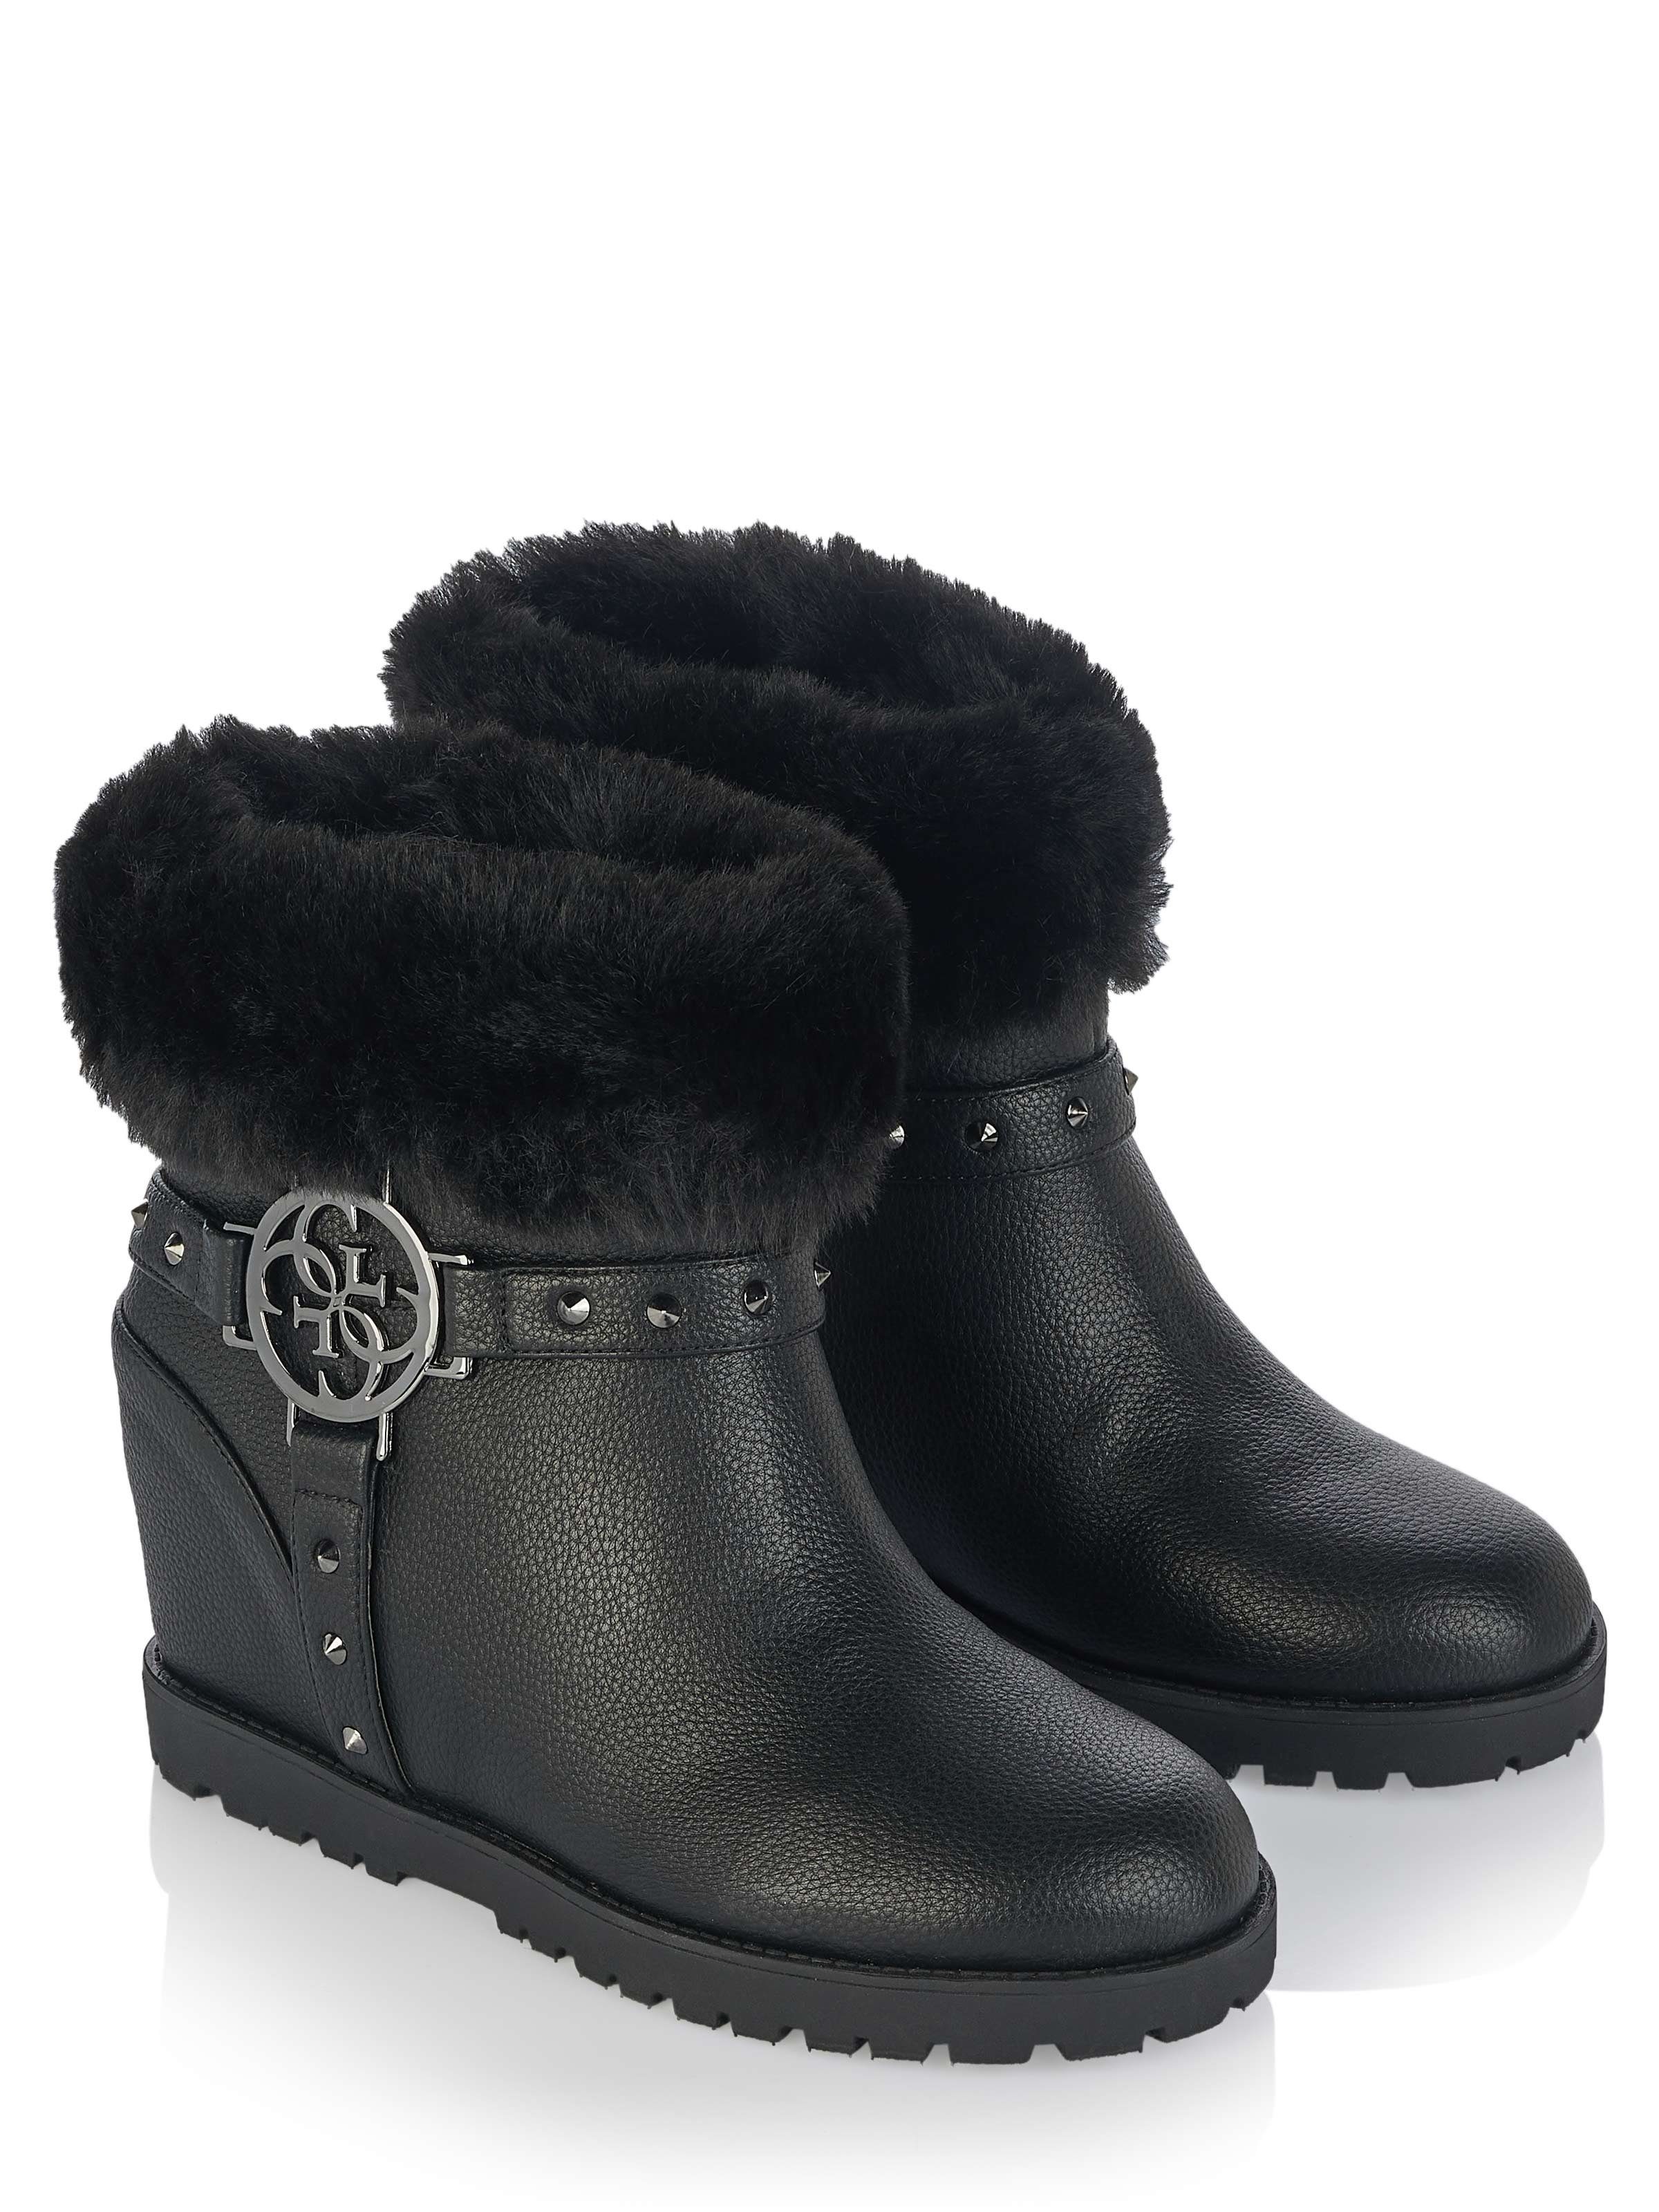 Guess GUESS Сапоги schwarz Ankleboots